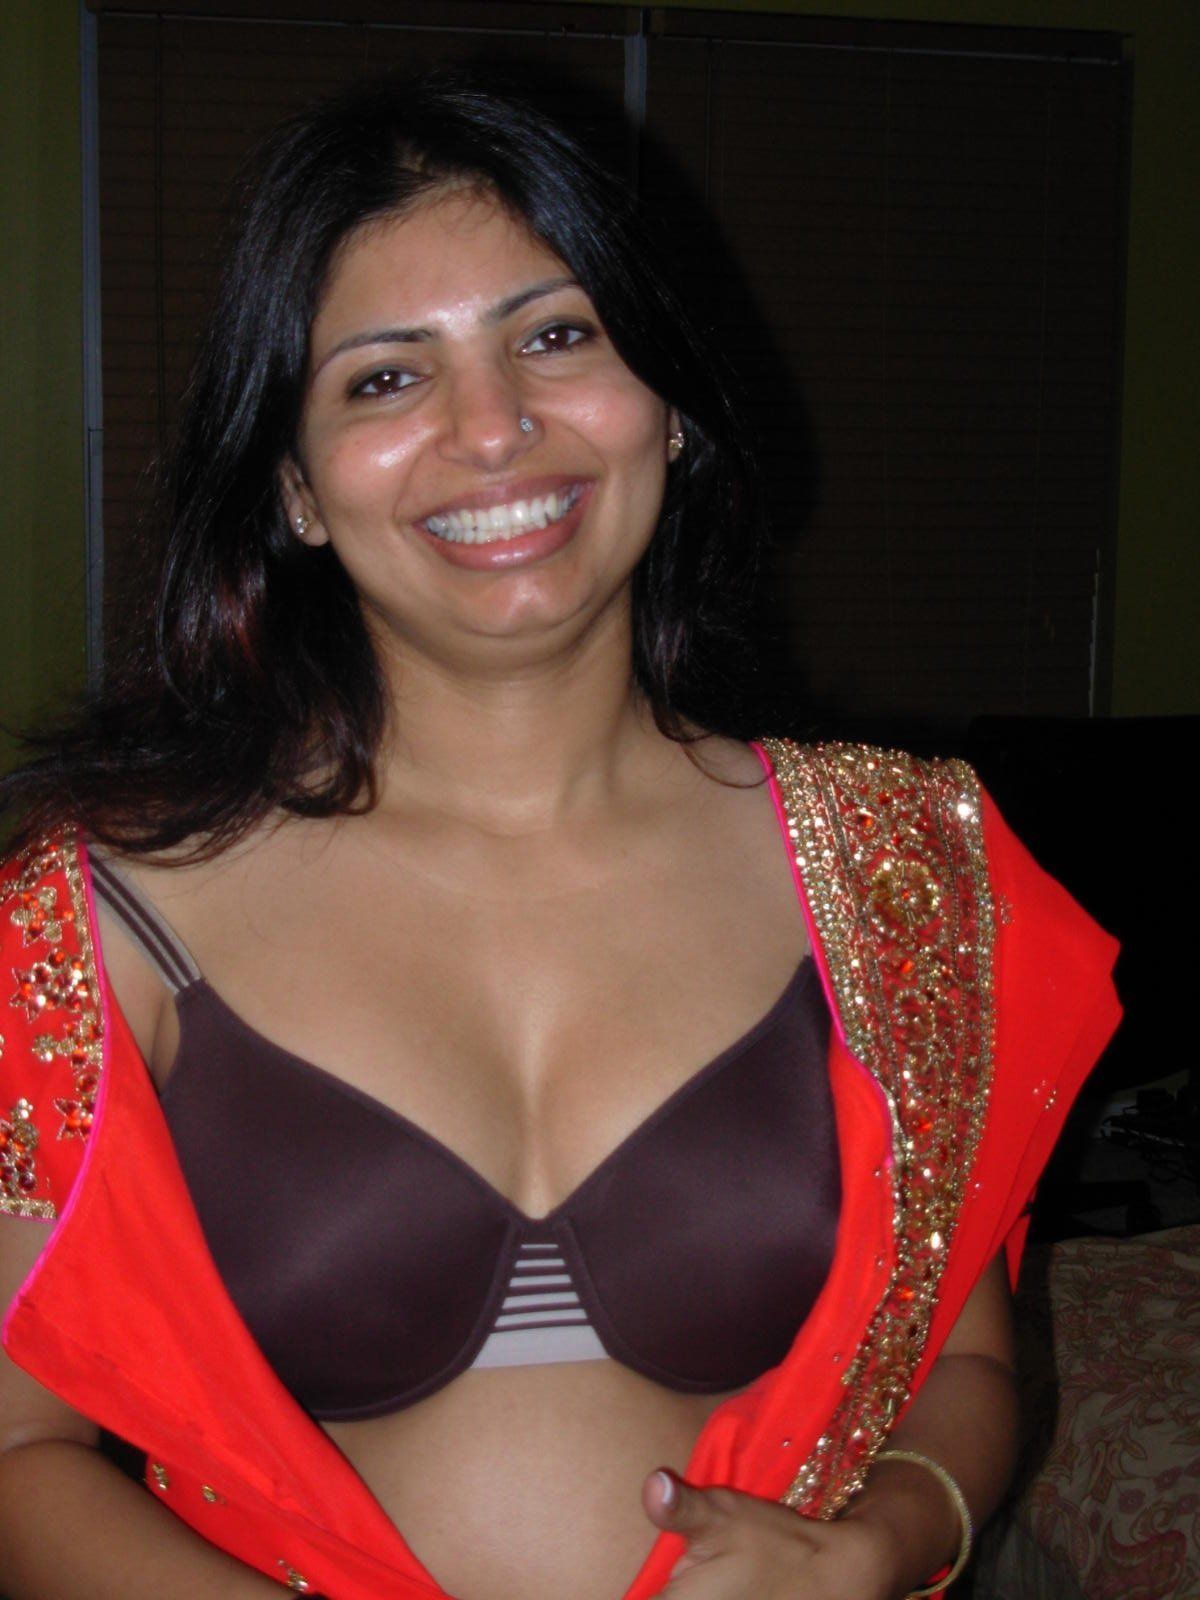 best of Rich indian photos of women Nude